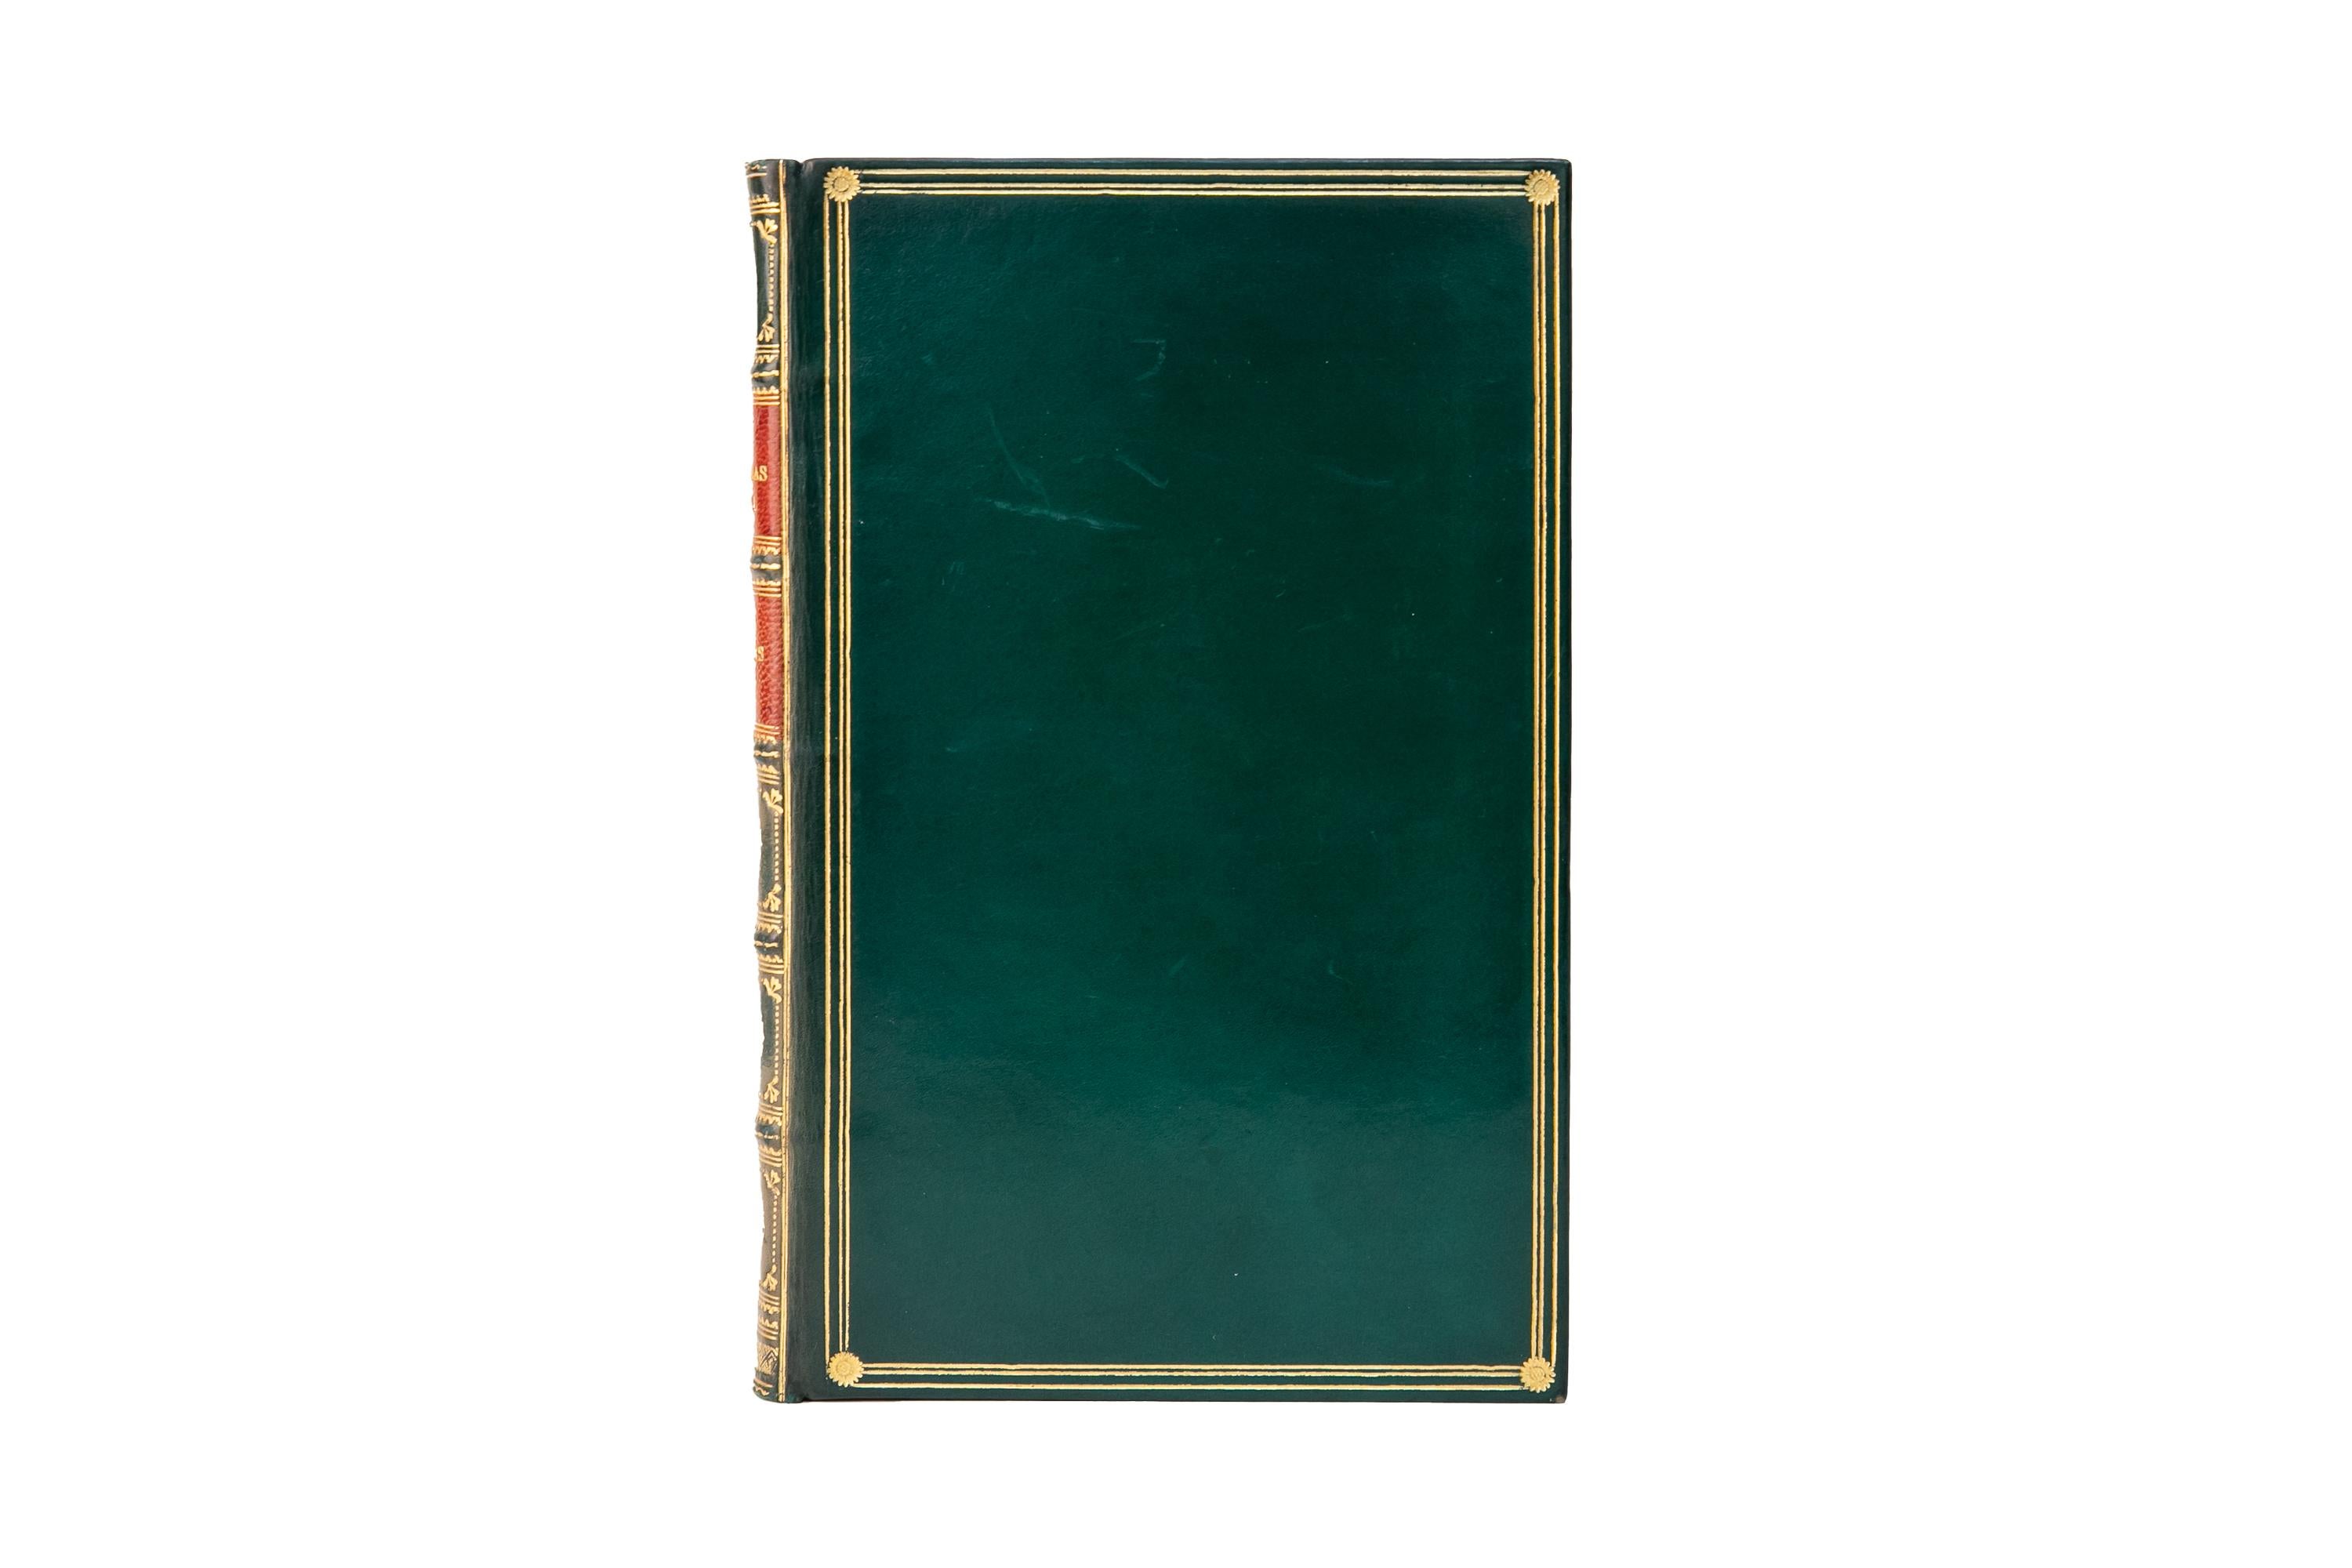 1 Volume. Charles Dickens, A Christmas Carol. Bound by Zaehnsdorf in full green calf with gilt-bordered covers. The raised band spine displays gilt-tooled detailing and red morocco labels. All edges are gilt with gilt-tooled dentelles and marbled